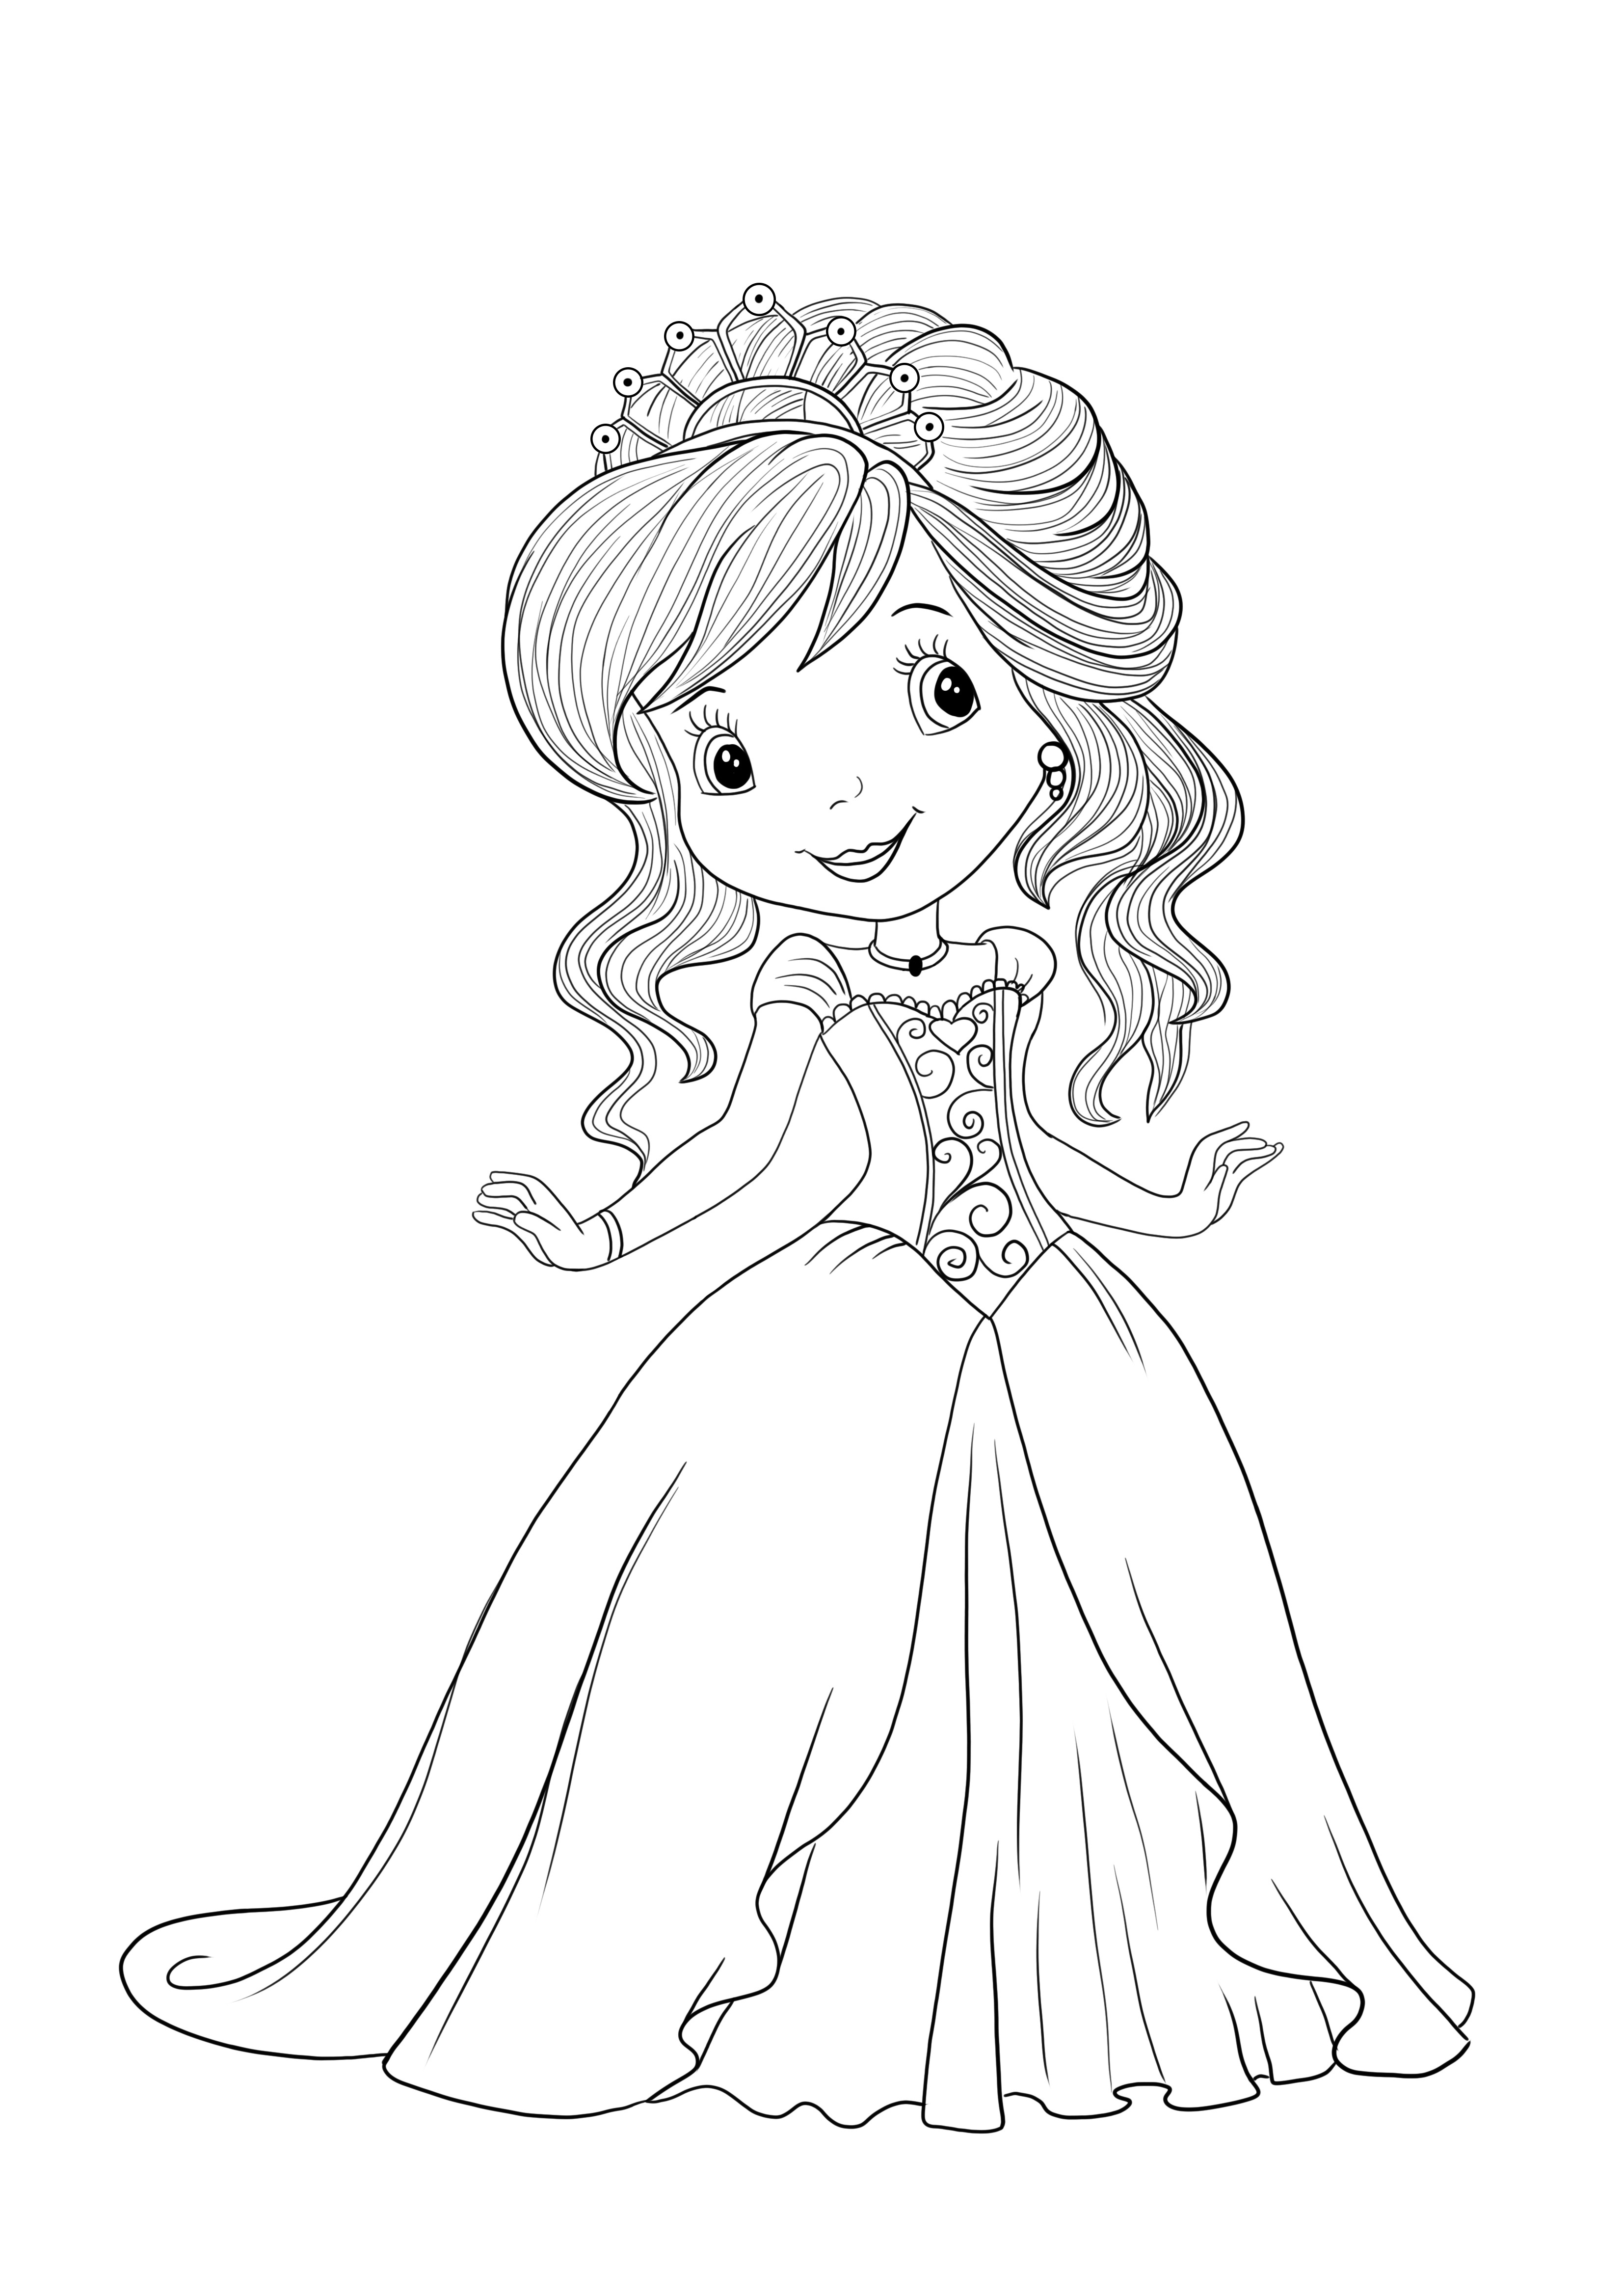 Cute strawberry shortcake to color and print for free